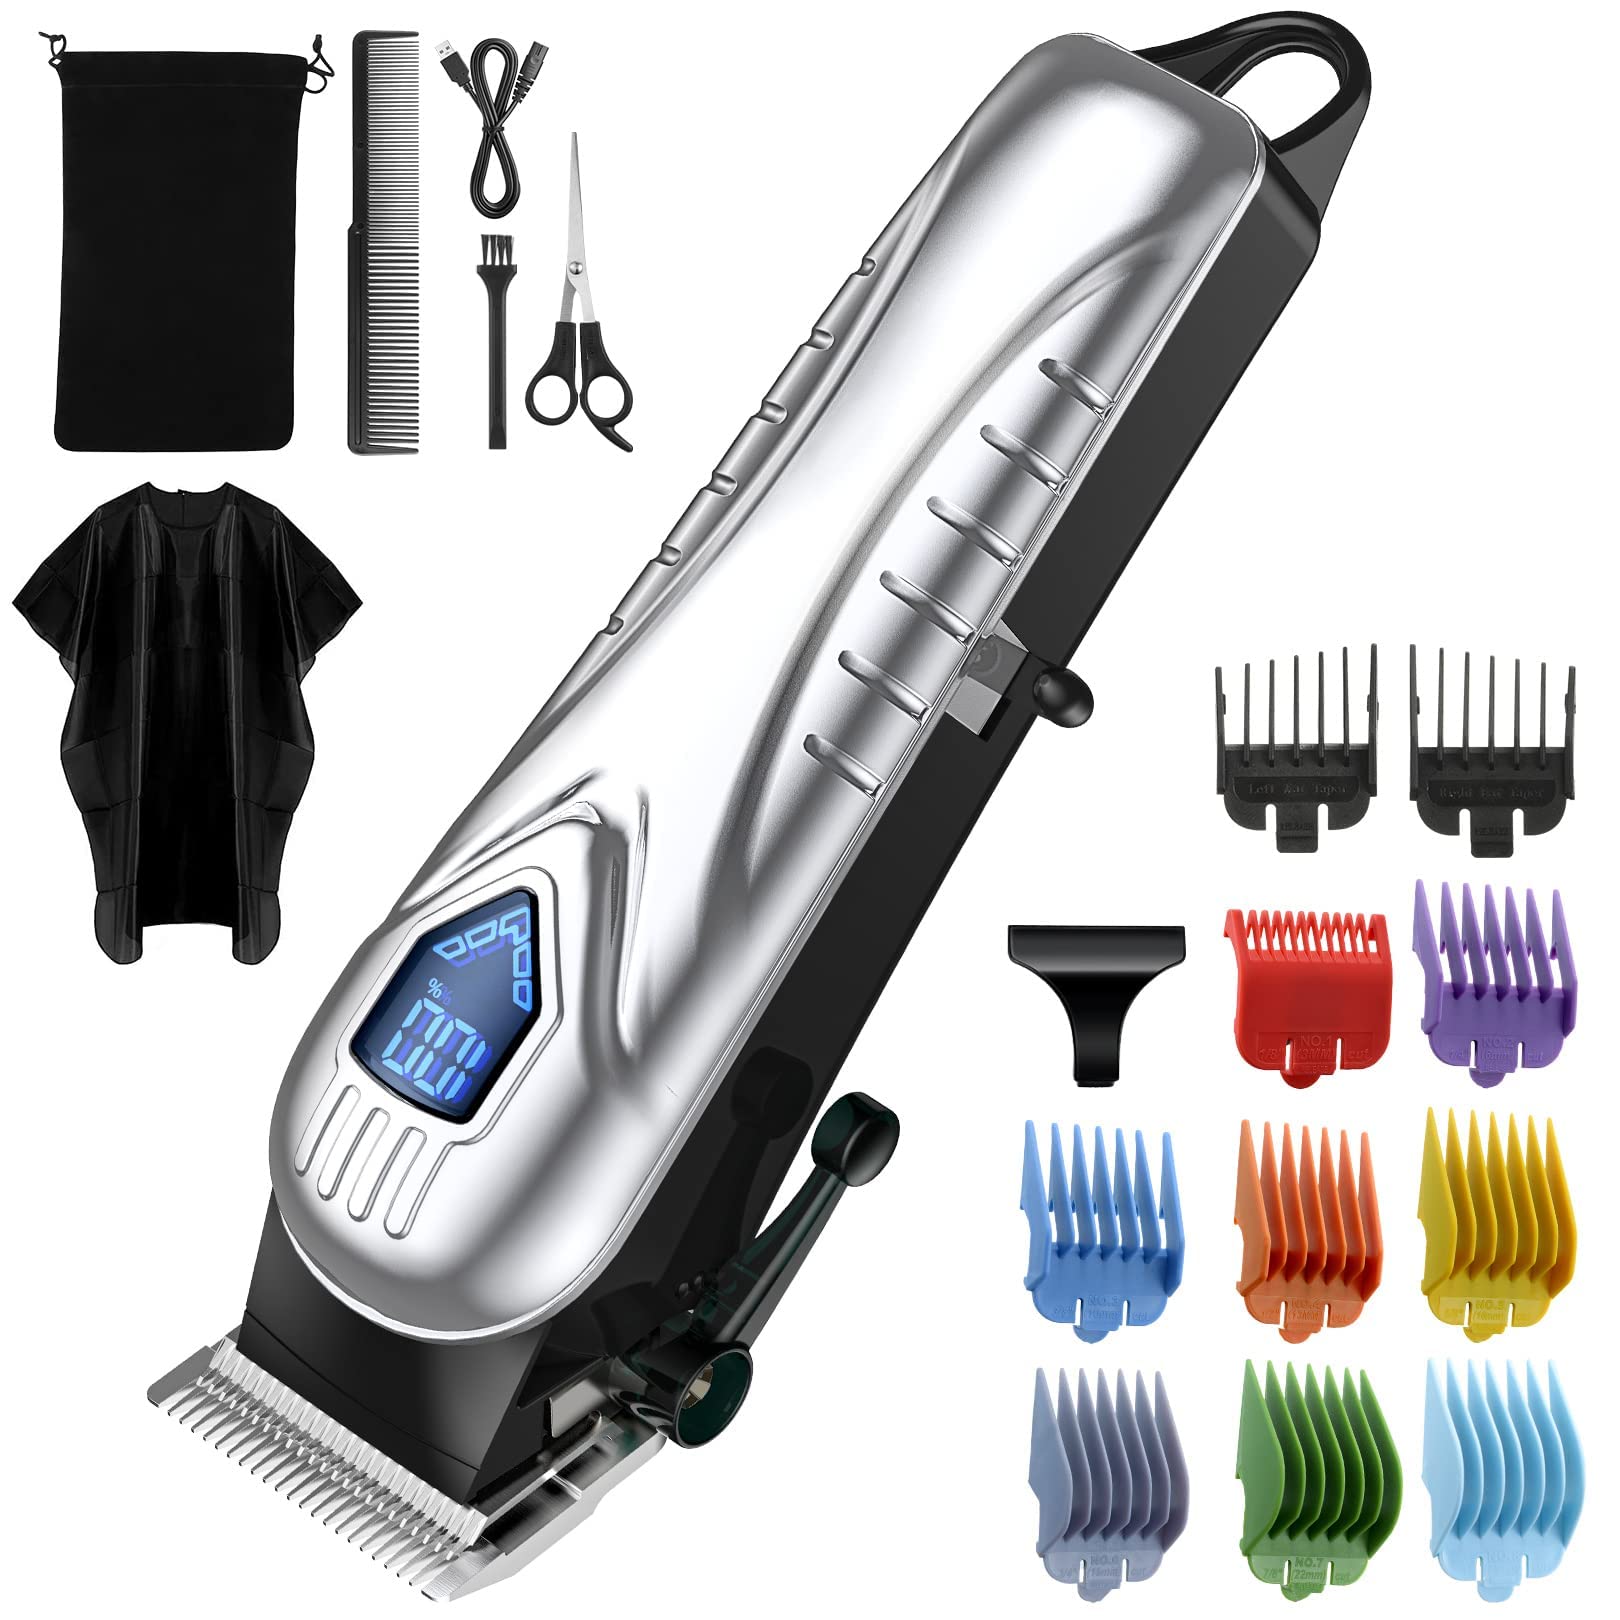 Chicclly Hair Clippers for Men&Women, 5 Hours Cordless Hair Cutting Kit with 10 Combs, LED Display, Low Noise Professional Beard Trimmer